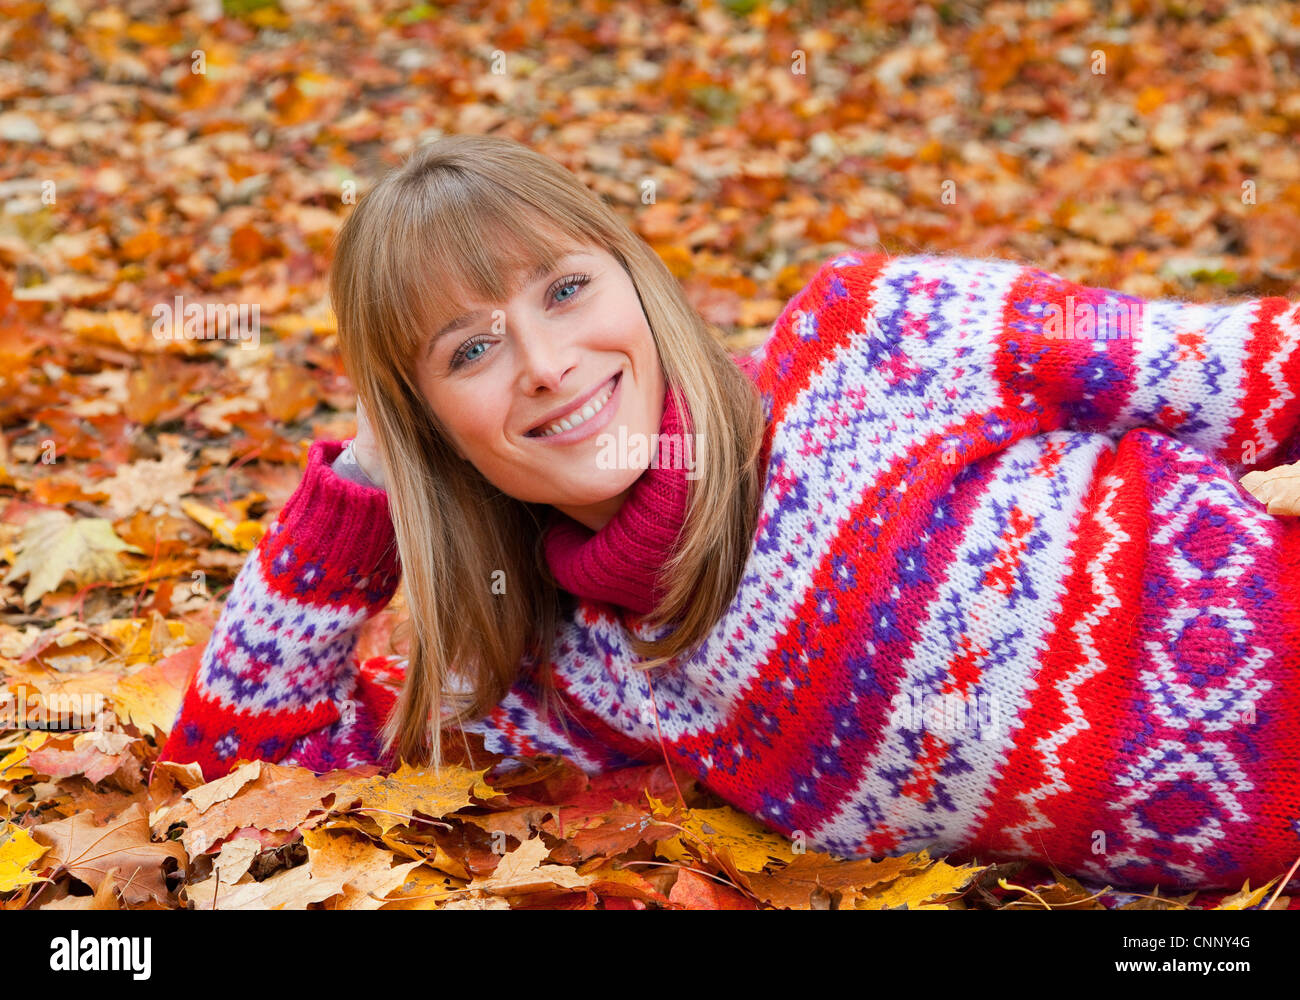 Smiling woman laying in fall leaves Stock Photo